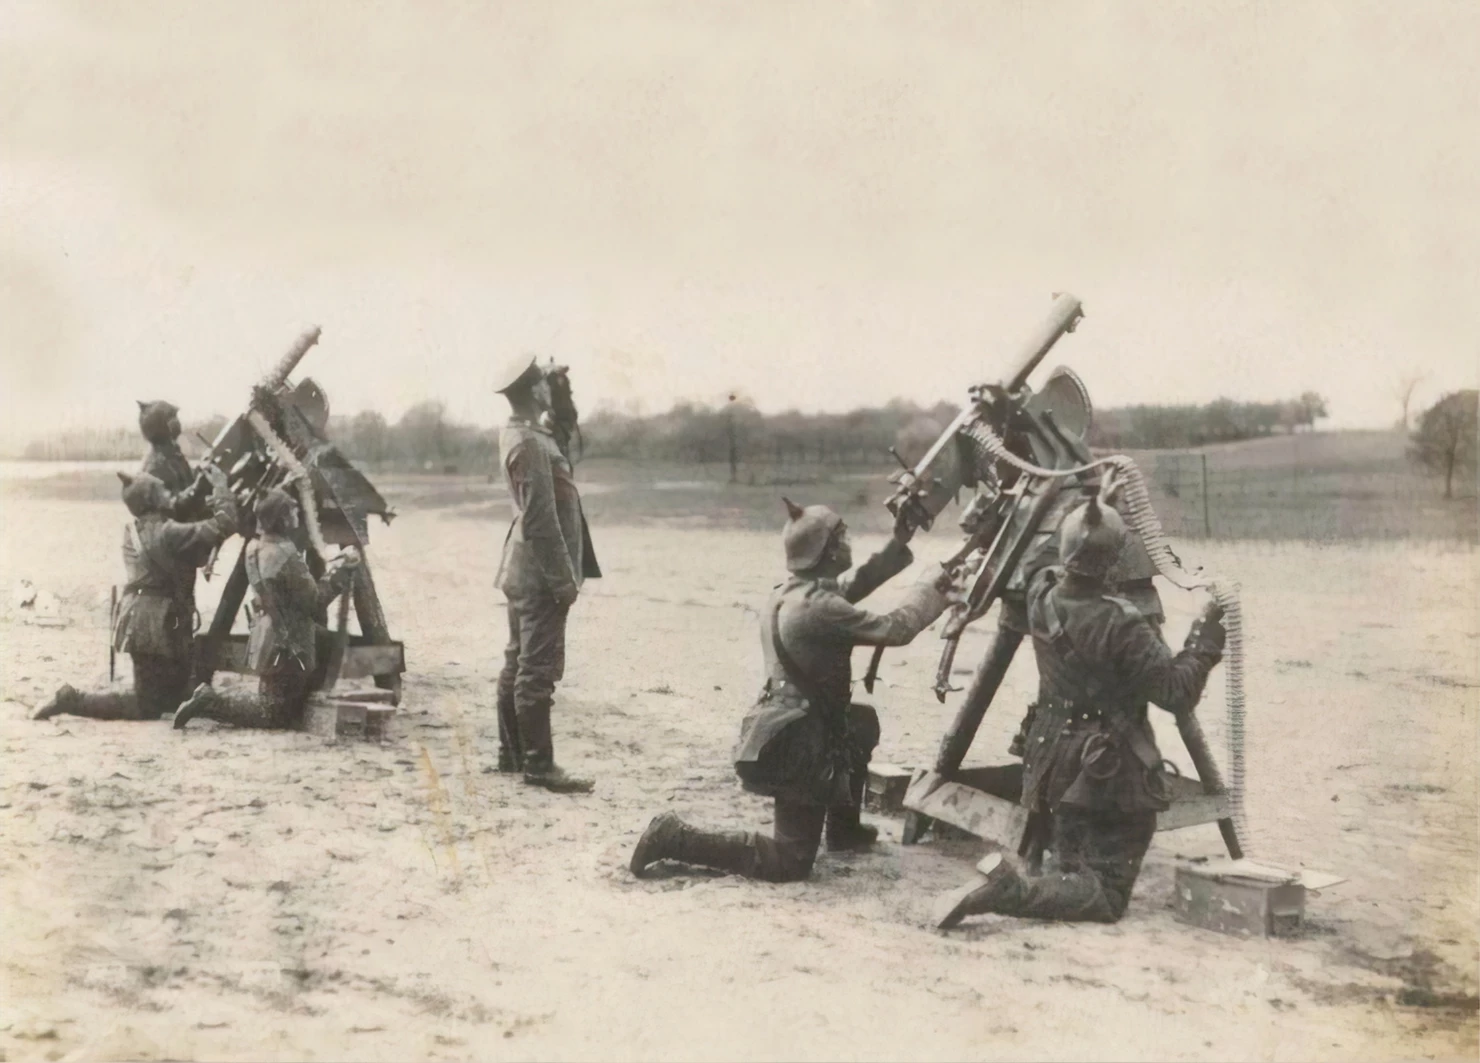 Old photo of soliders aiming mounted guns